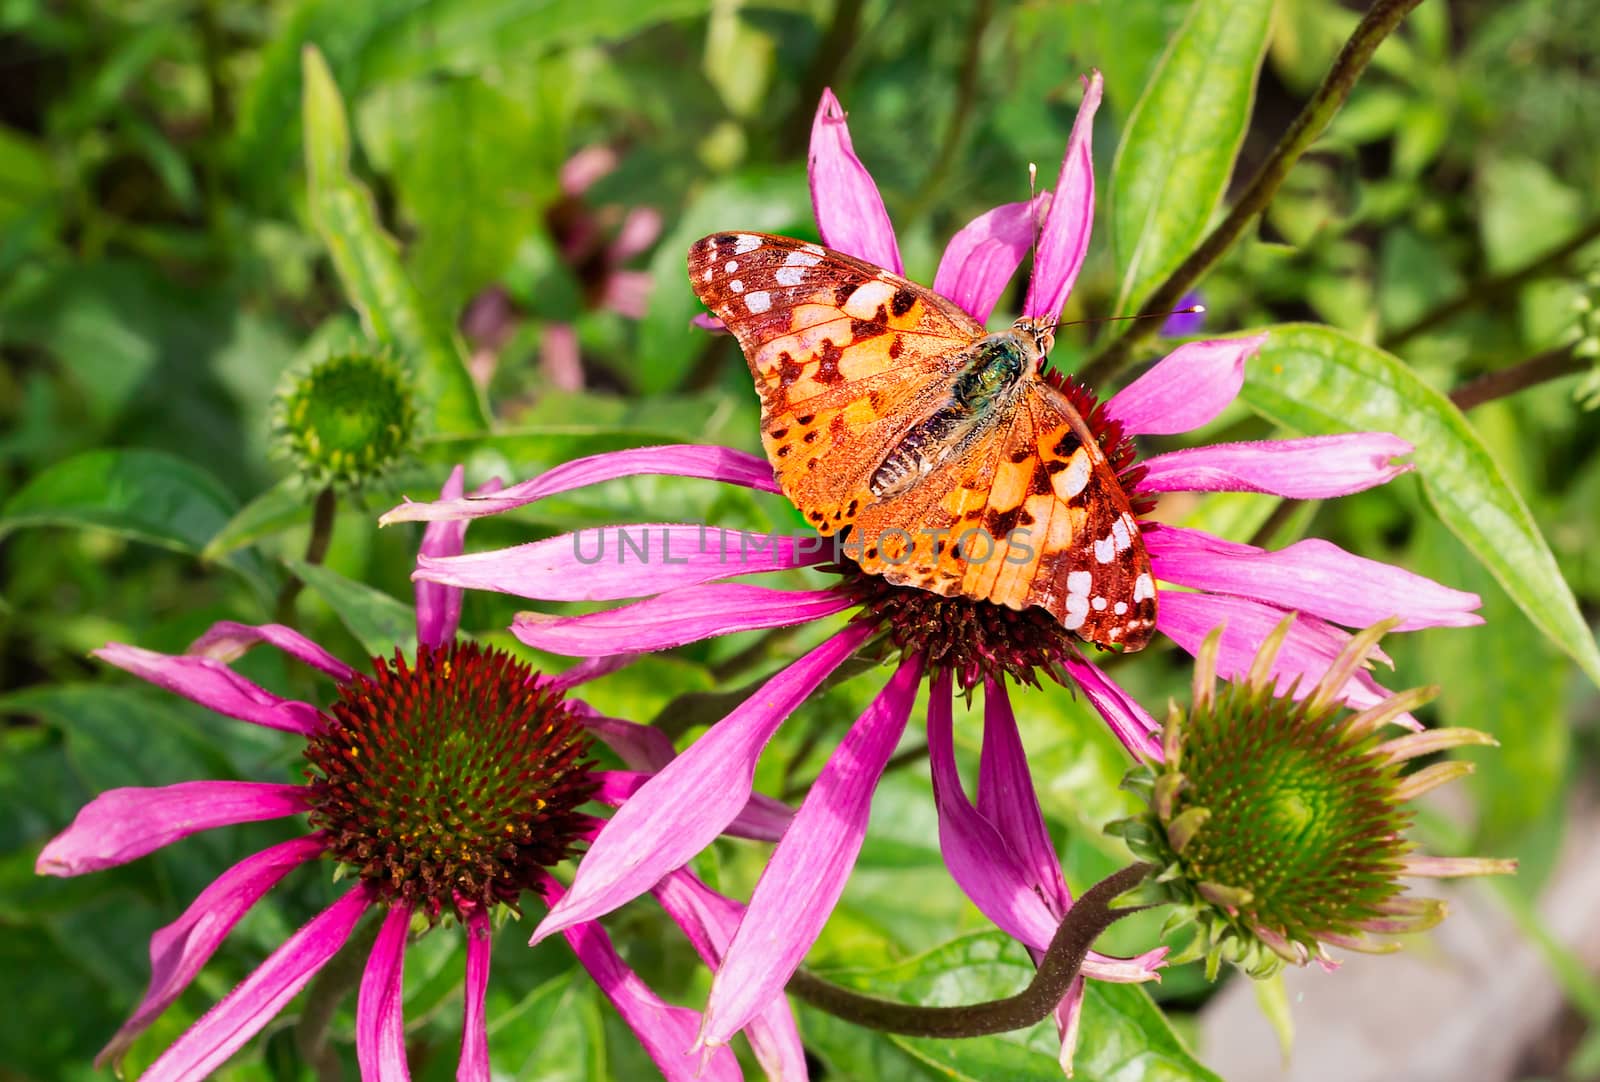 The large beautiful butterfly collects nectar from a bright pink flower ����������������.